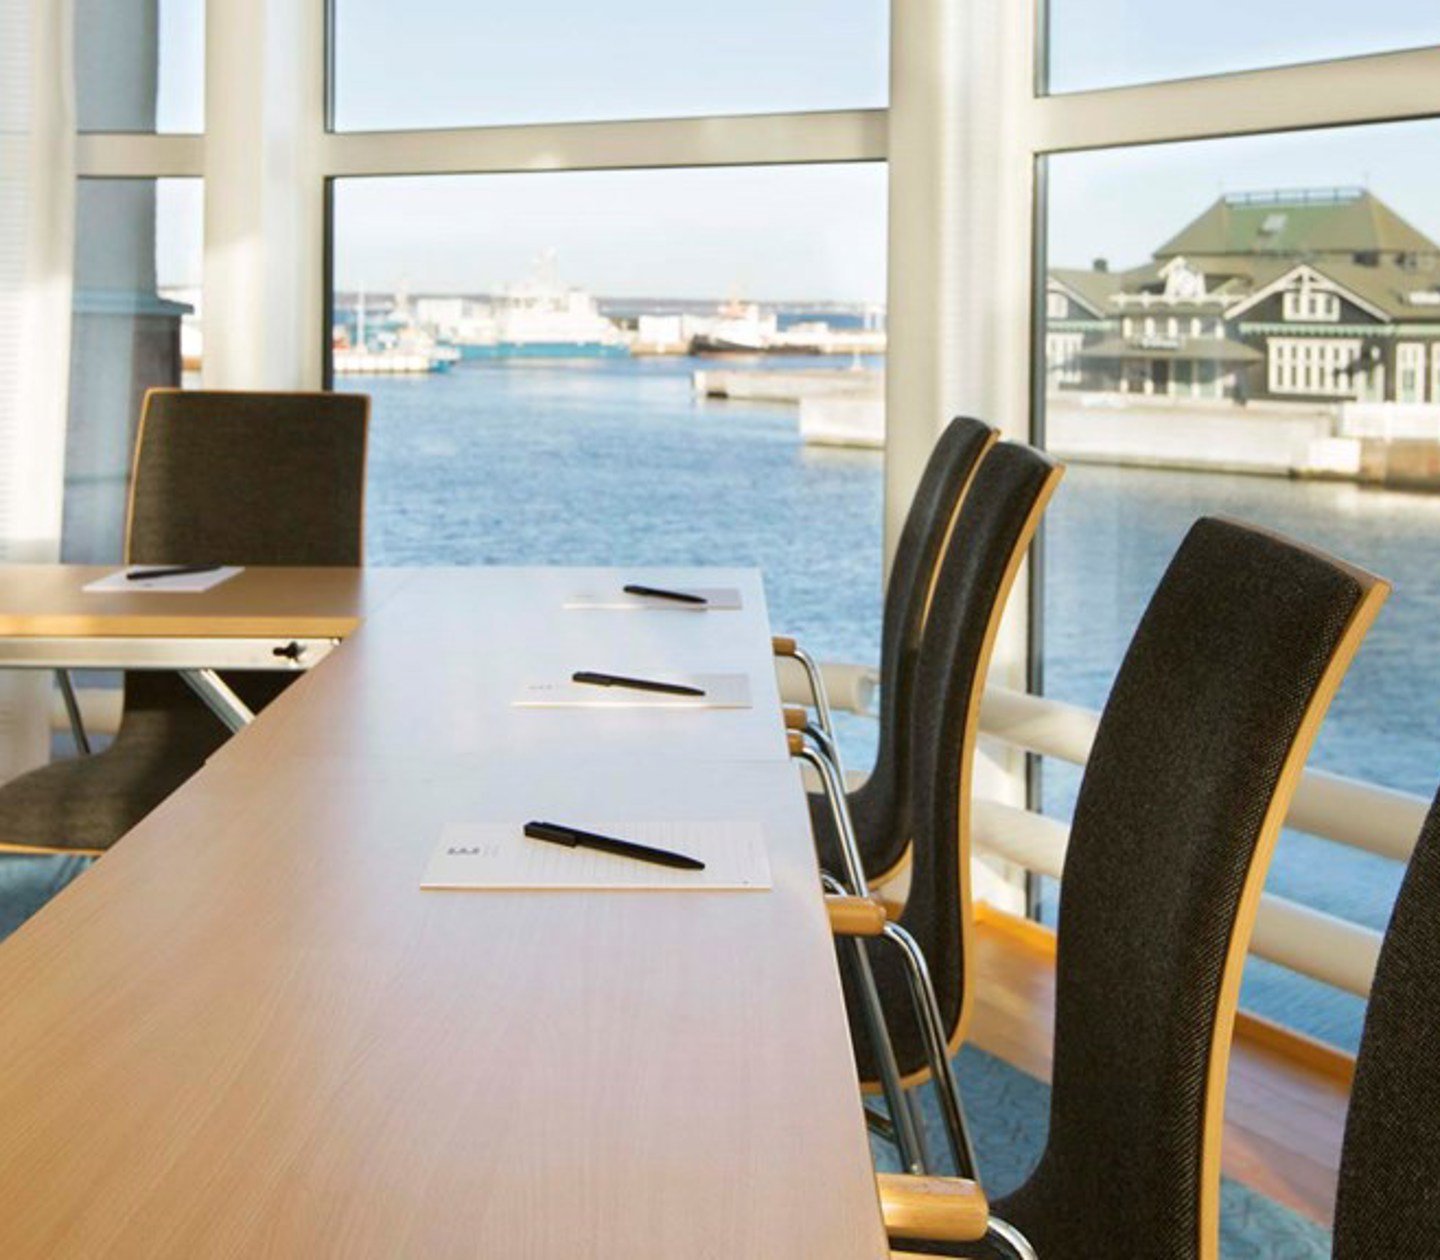 Conference room with wooden table, dark chairs and large windows with a sea view